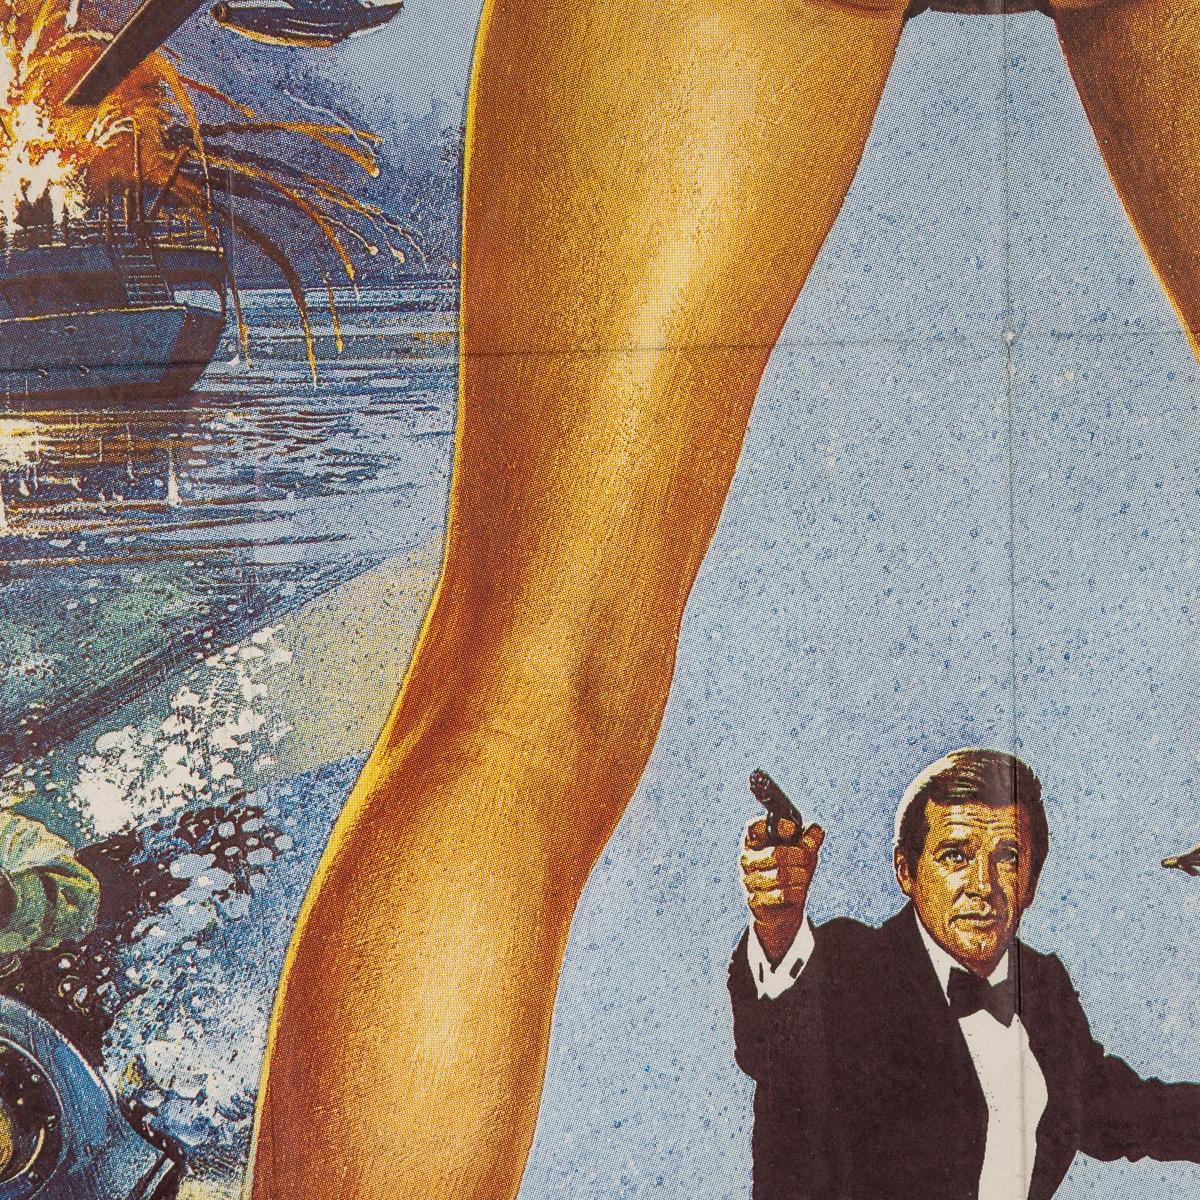 Original French Release James Bond 'For Your Eyes Only' Poster, c.1983 3